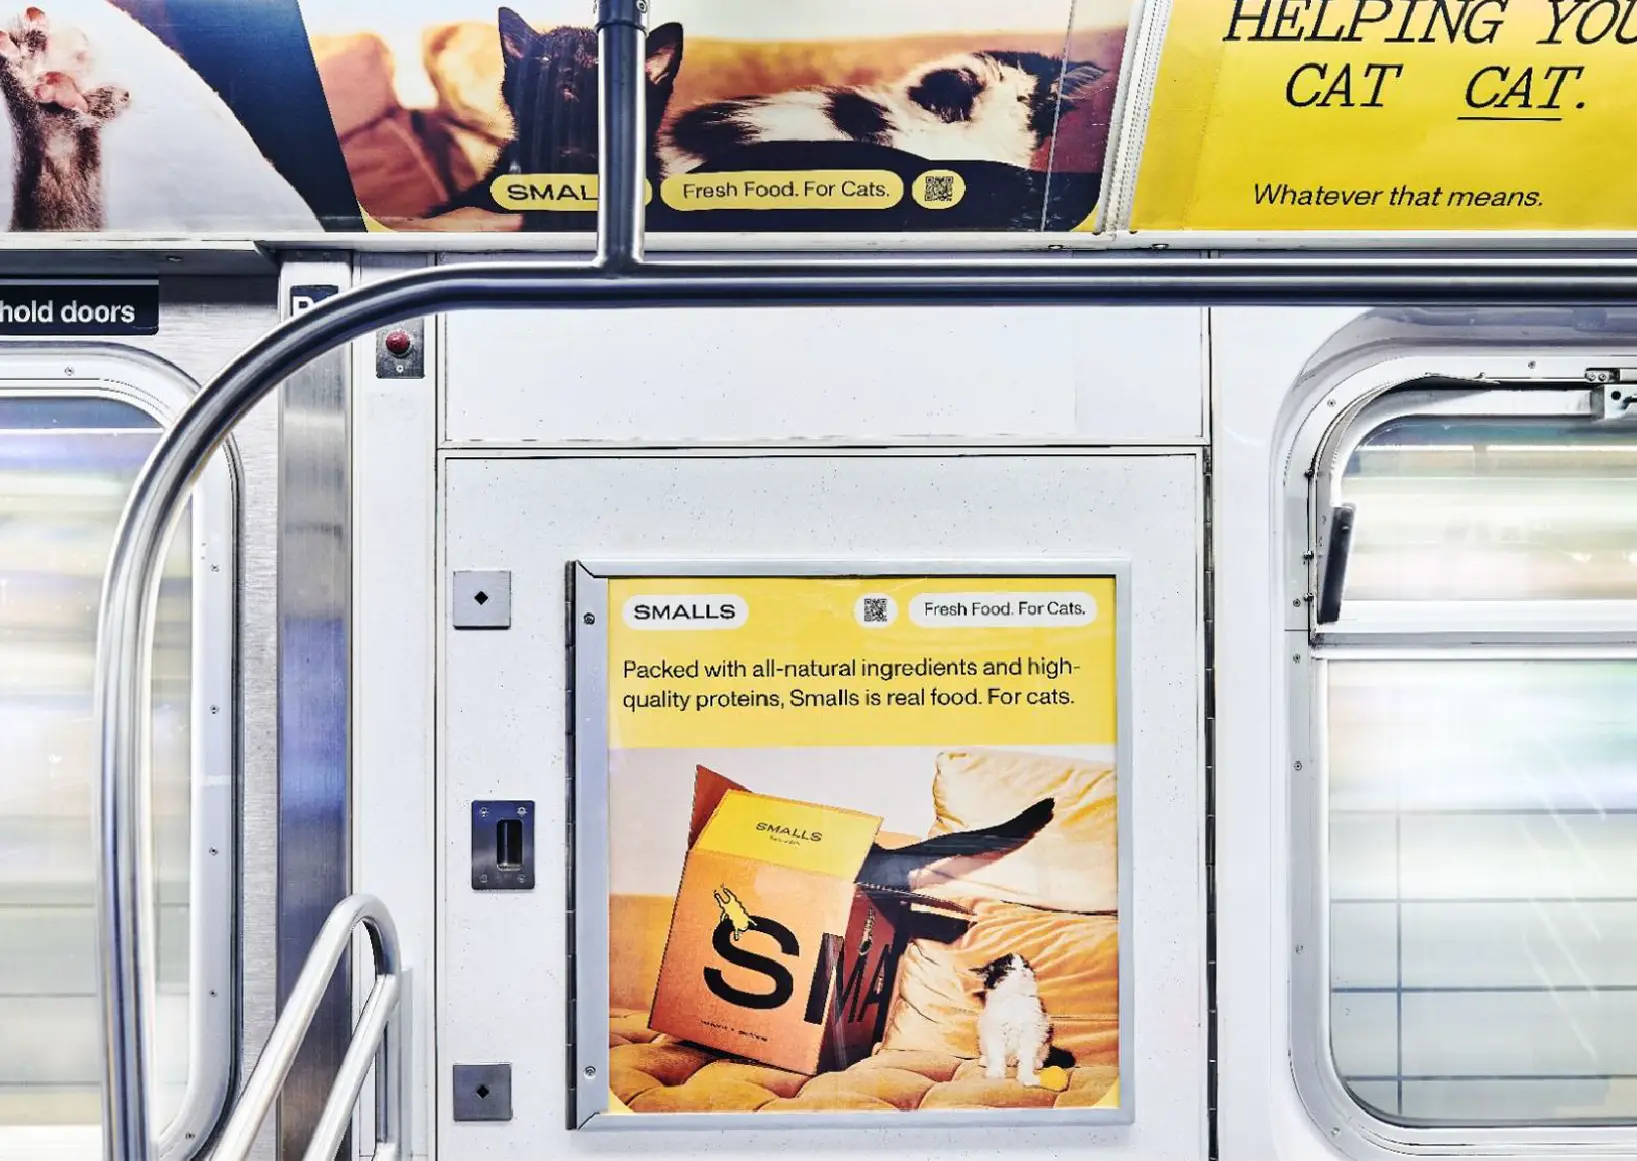 Photo within a New York City subway train showcasing Smalls advertising and QR Codes throughout.